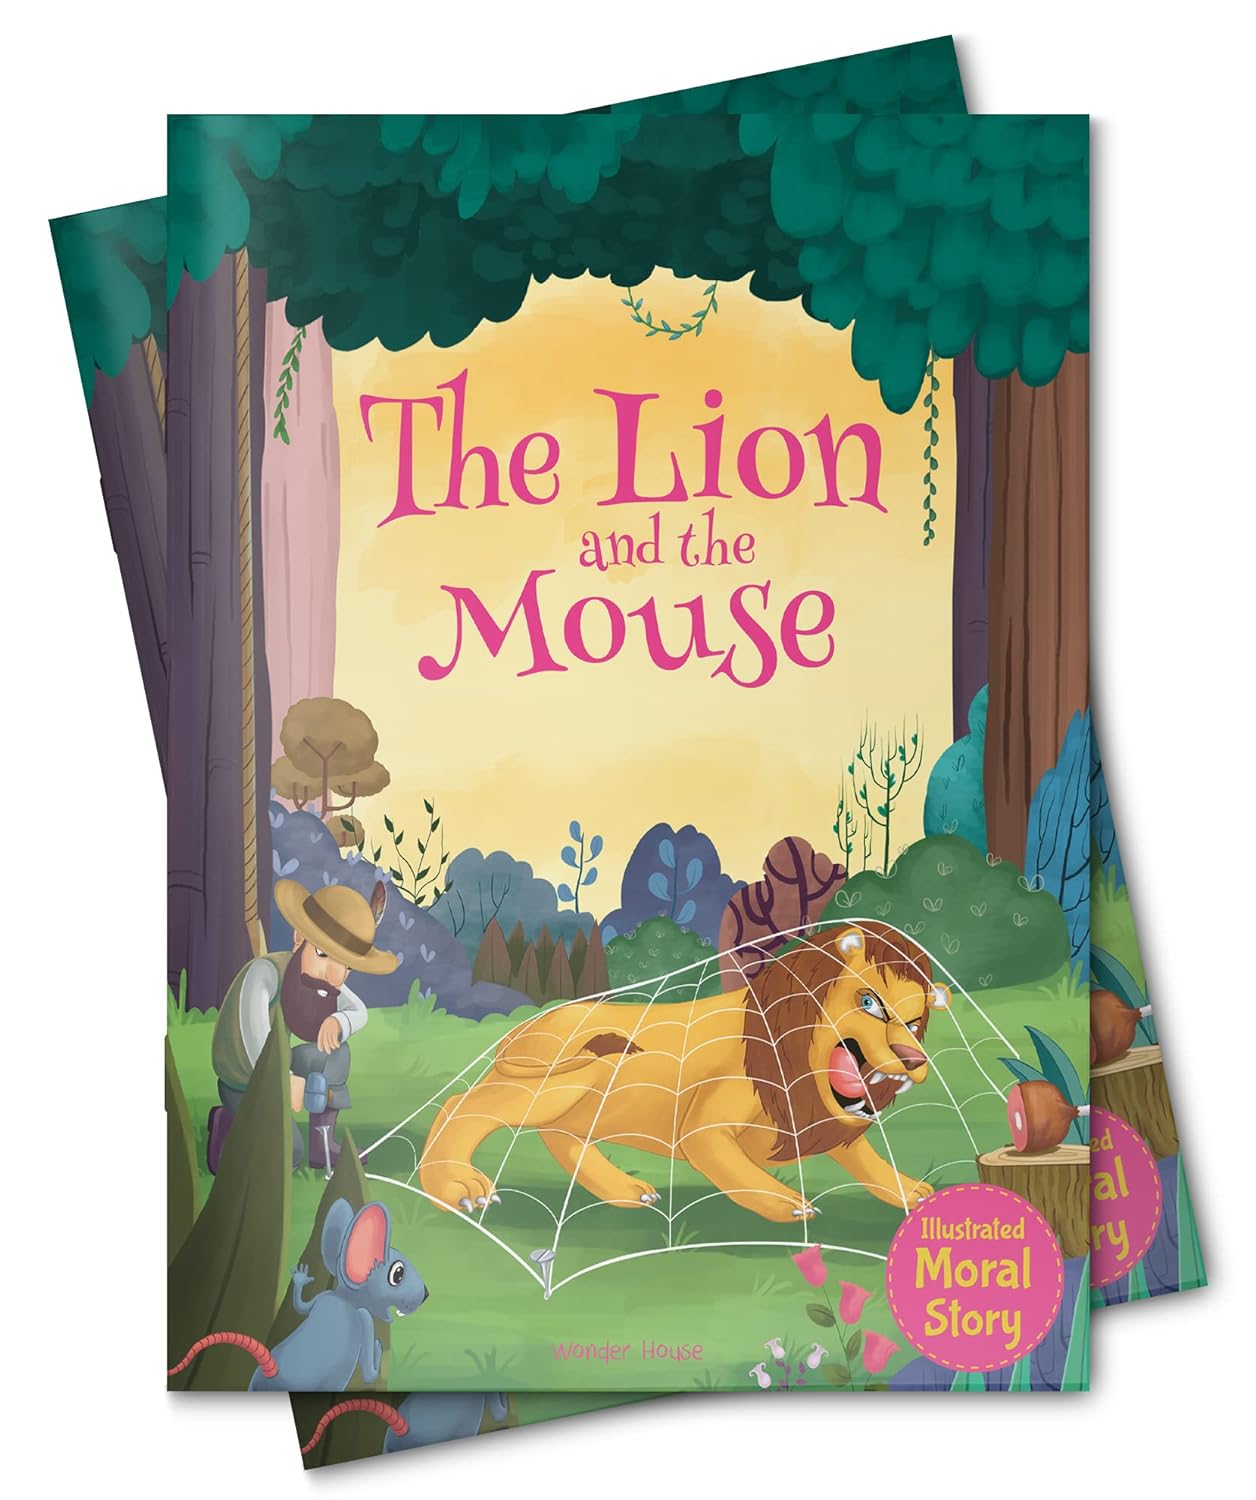 The Lion and the Mouse - Illustrated Moral Story for Children